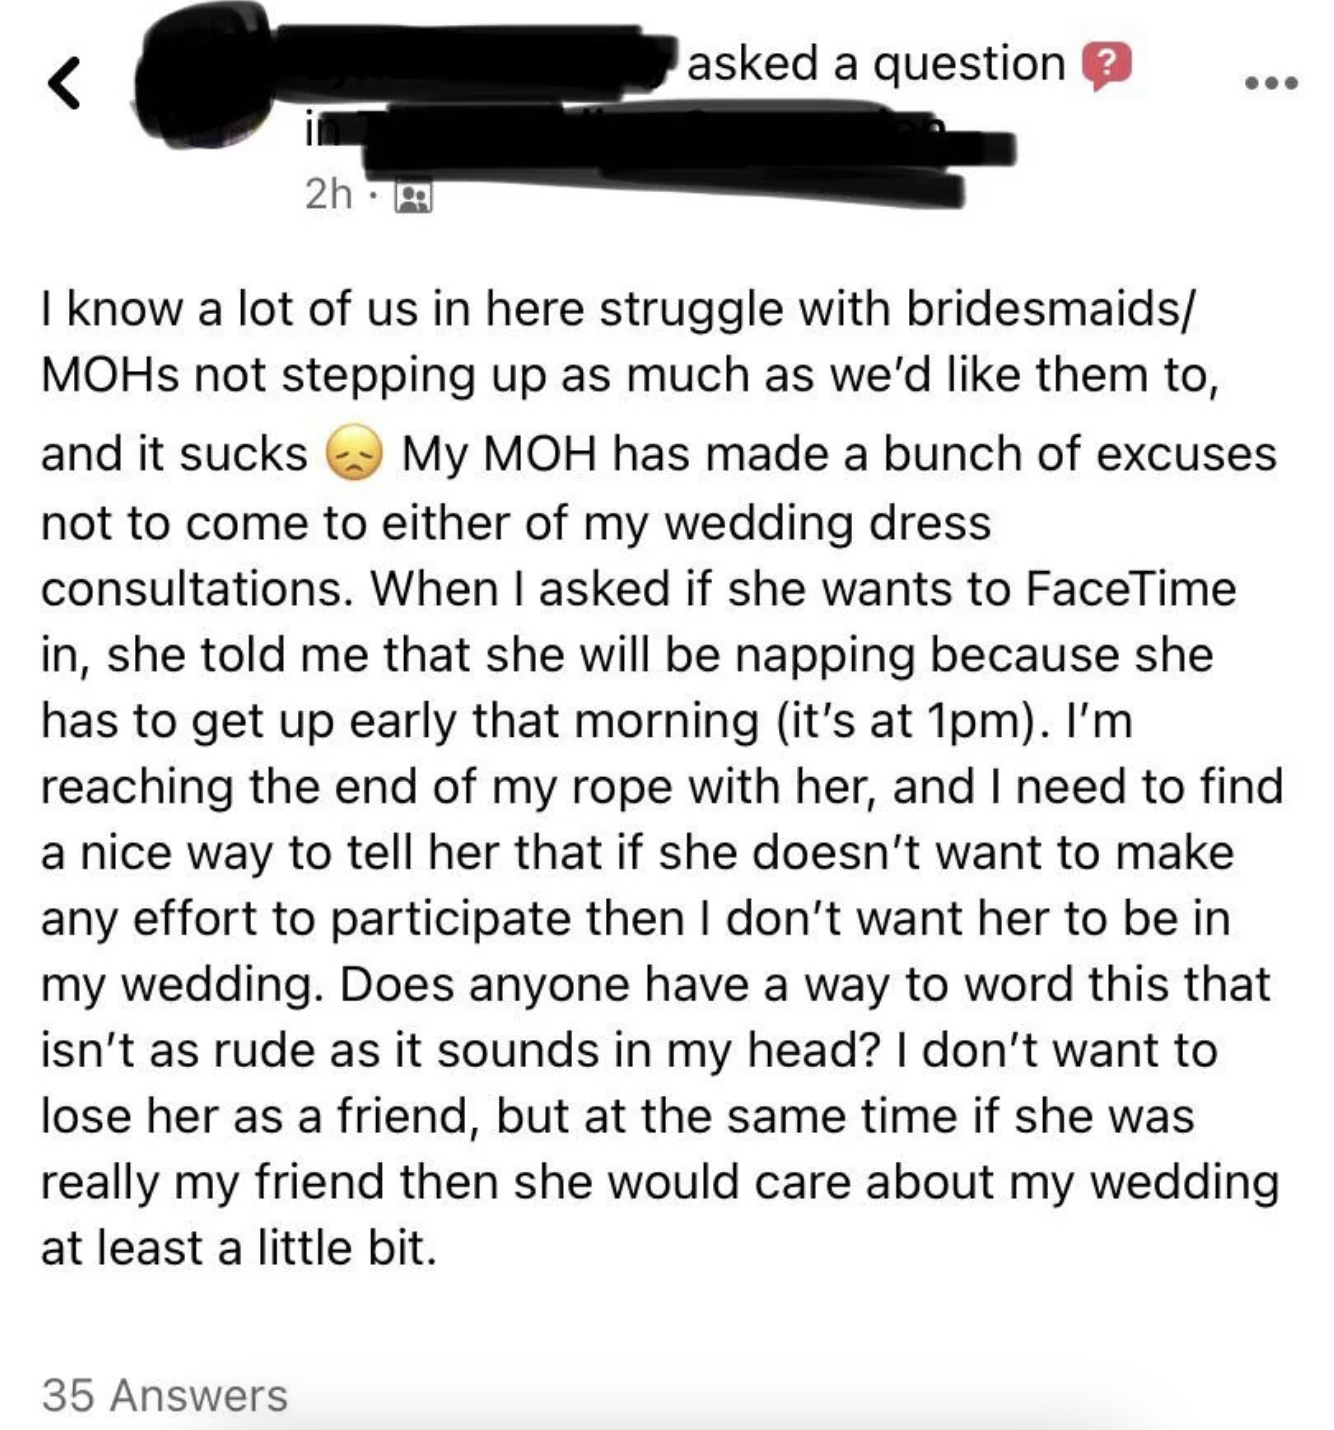 The bride-to-be posts in a Facebook group asking what to do about a maid of honor who hasn&#x27;t been participating, and how to talk to her without sounding mean